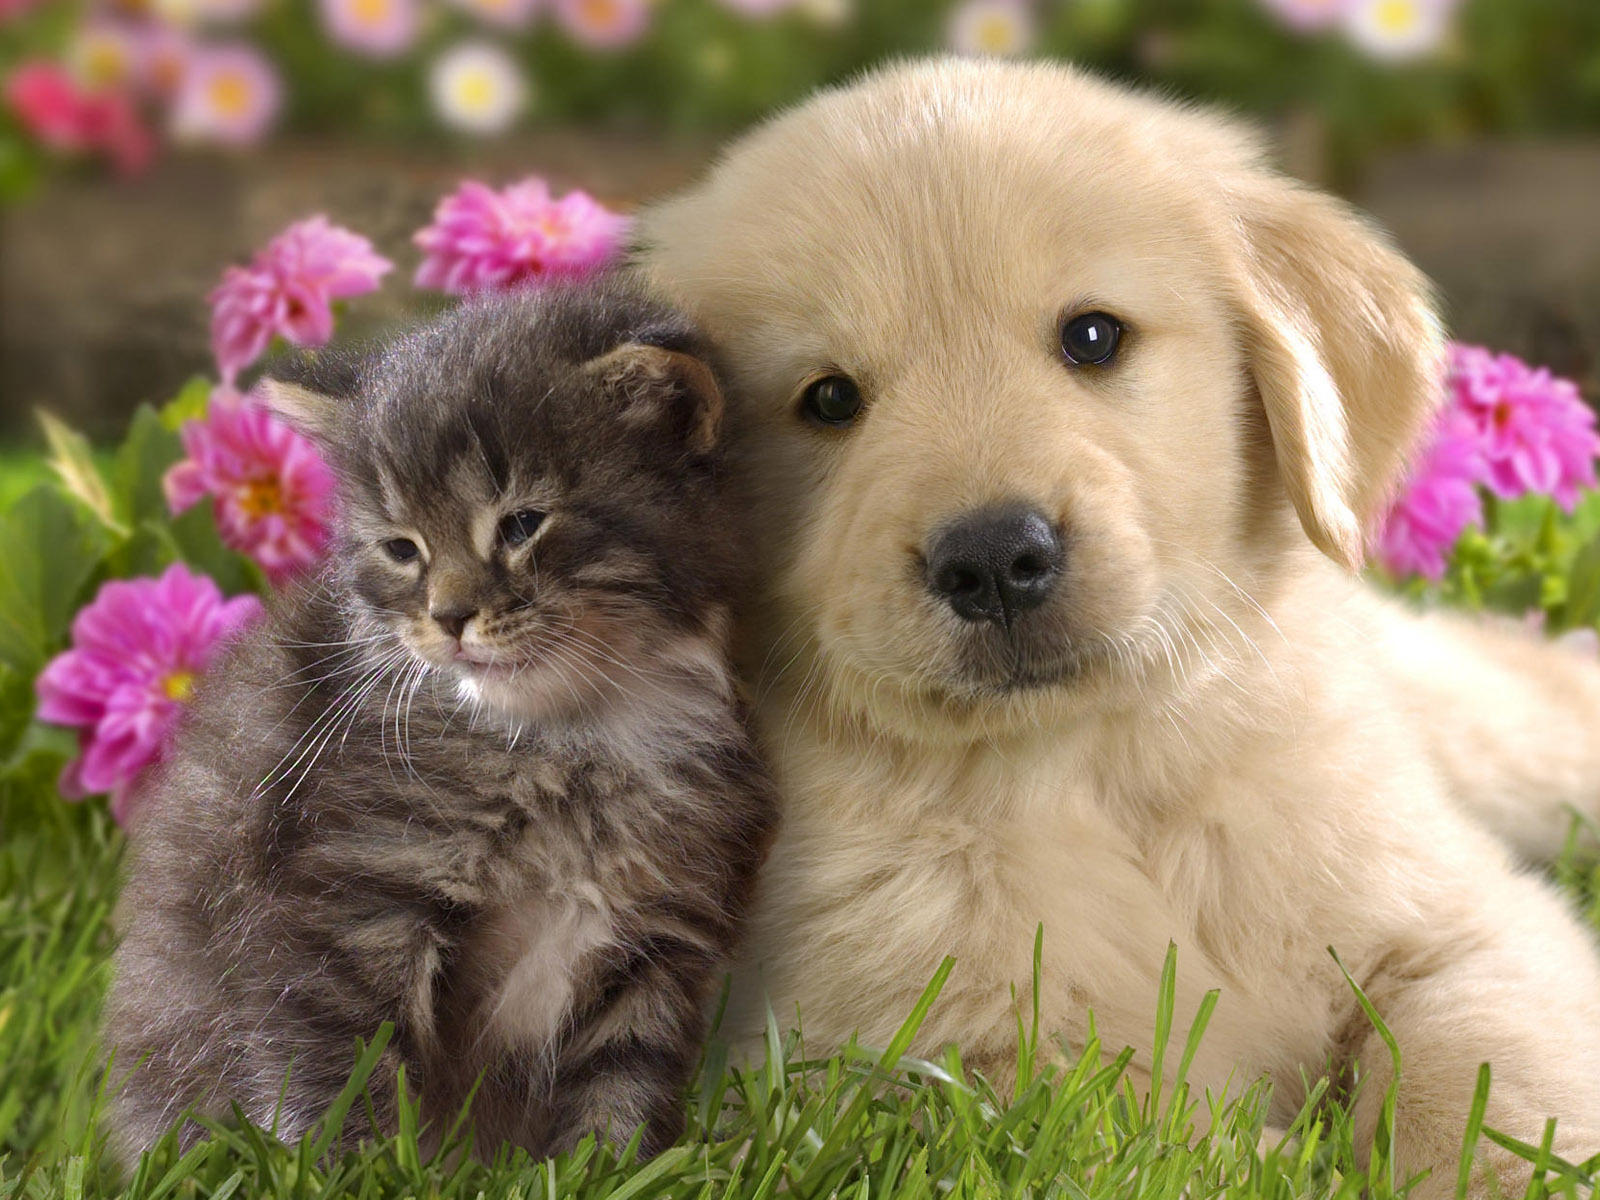 Cute Cat and Dog Friendship HD Wallpaper | HD Nature Wallpapers